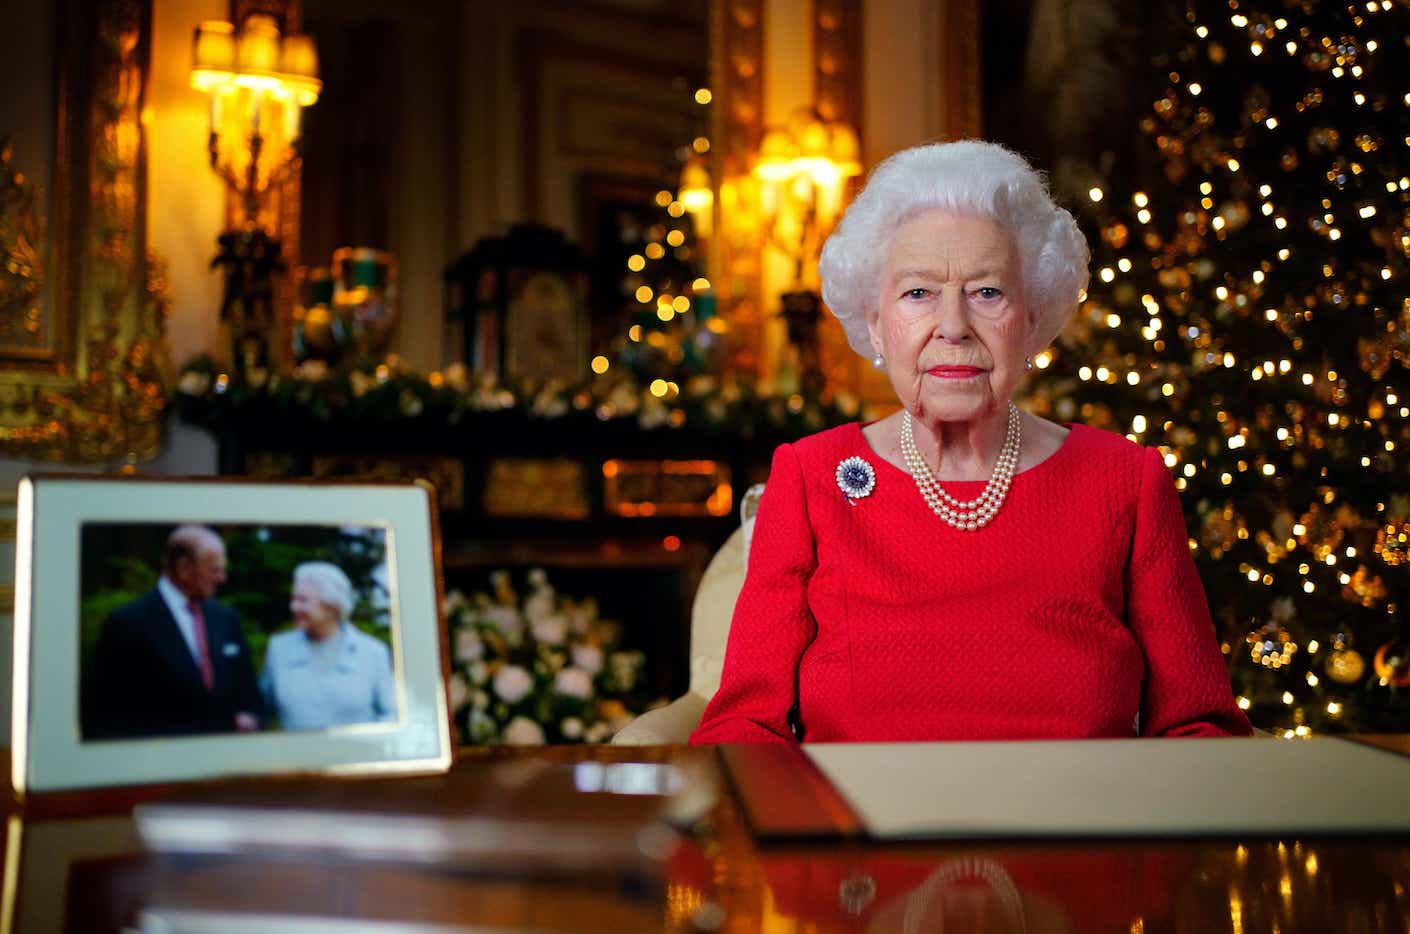 Queen Elizabeth II records her annual Christmas broadcast in the White Drawing Room in Windsor Castle in 2021. A portrait of her and her husband sits in the foreground.